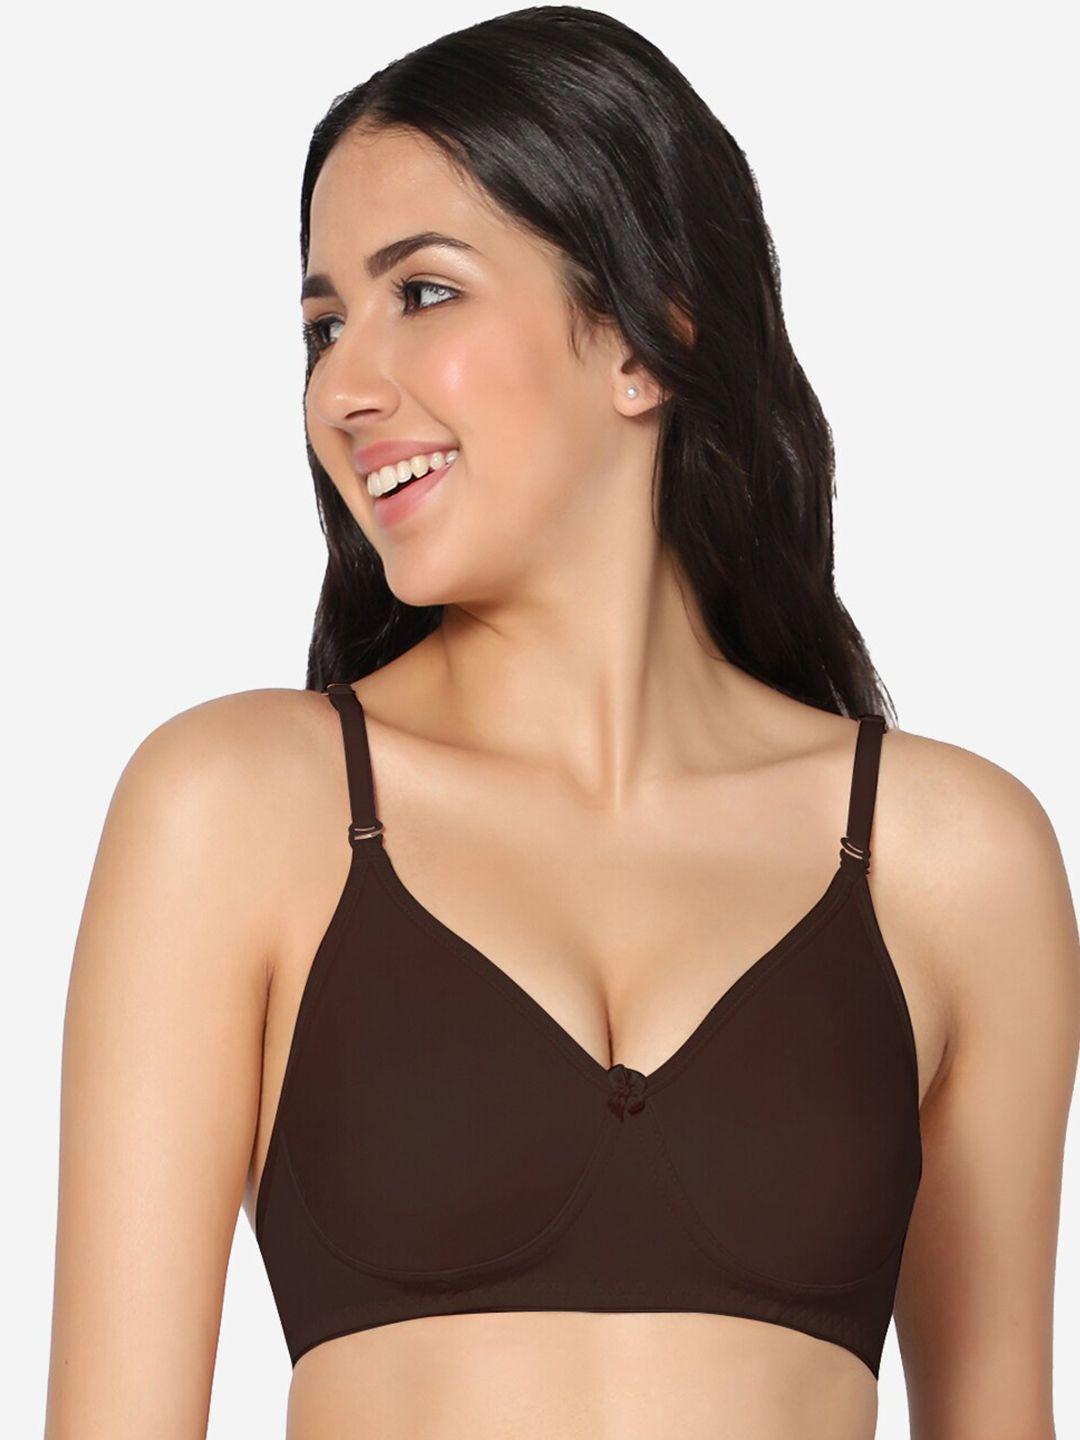 in-care--full-coverage-non-padded-pure-cotton-t-shirt-bra-with-all-day-comfort